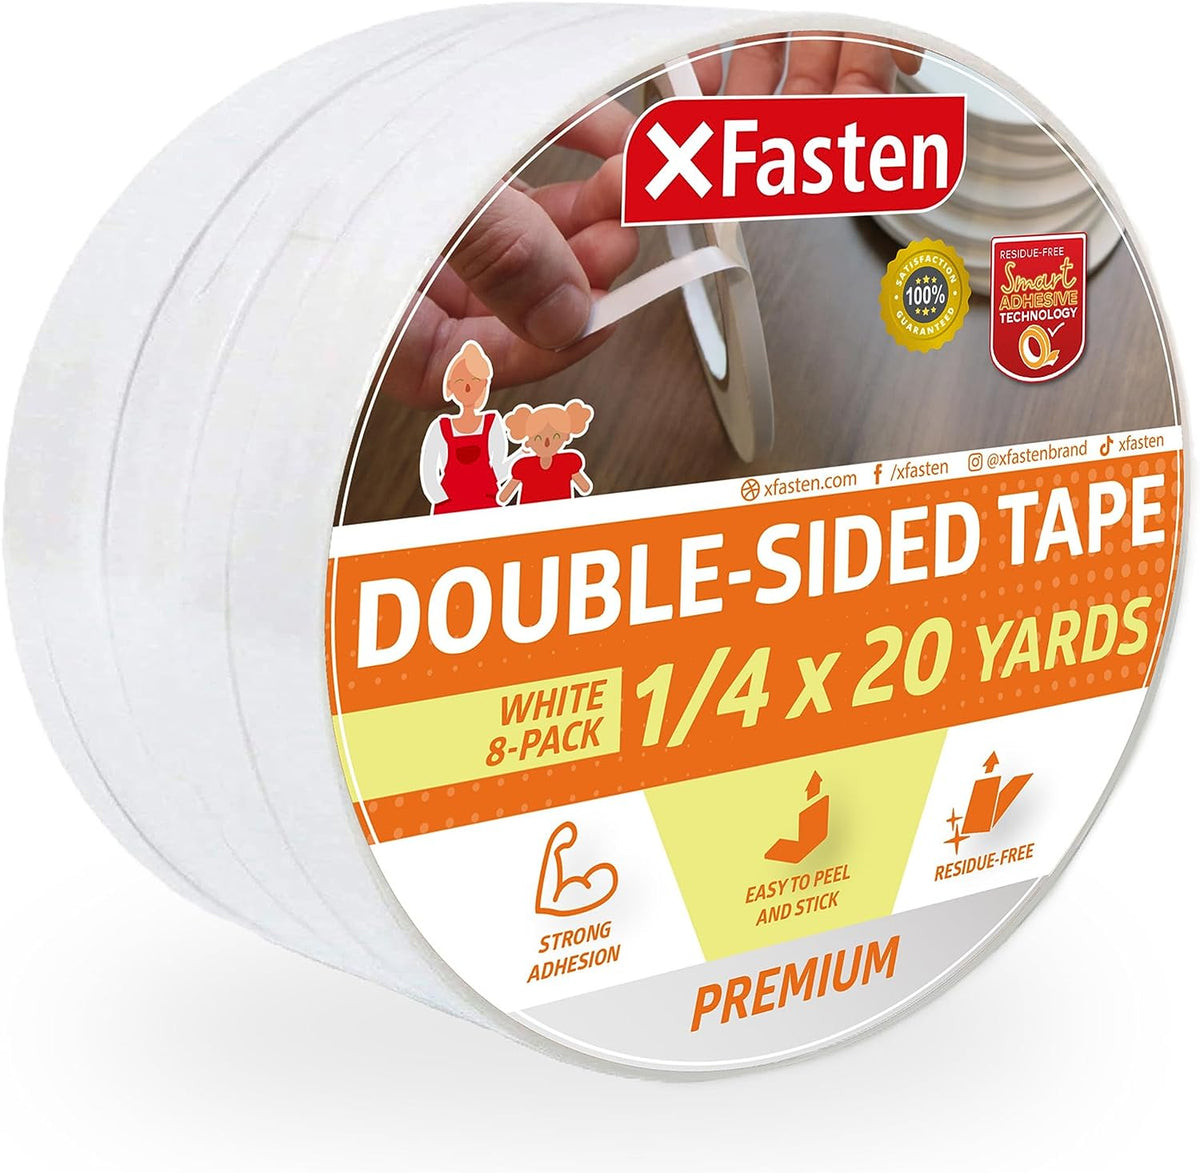 XFasten Double Sided Tape Roller Applicator, PACK OF 4